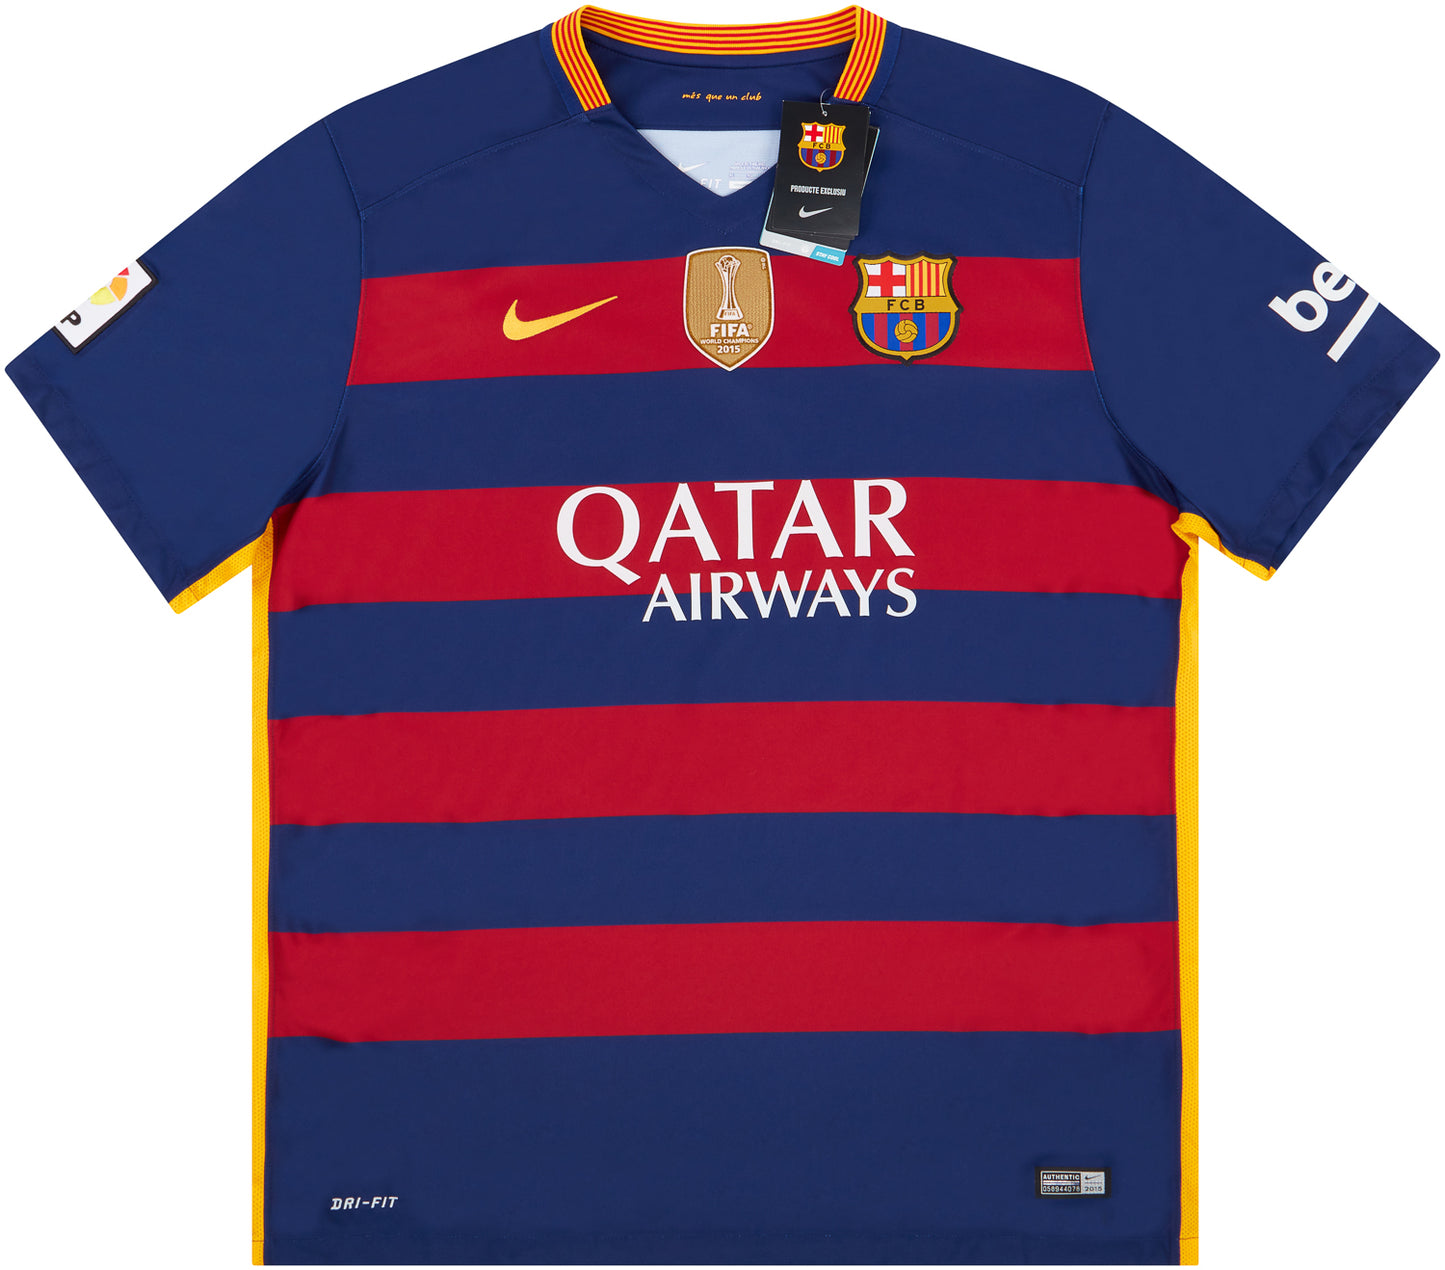 Lionel Messi FC Barcelona Nike 2015/16 UEFA Champions League Home Kit Iconic Authentic Nike Jersey - Blue & Red